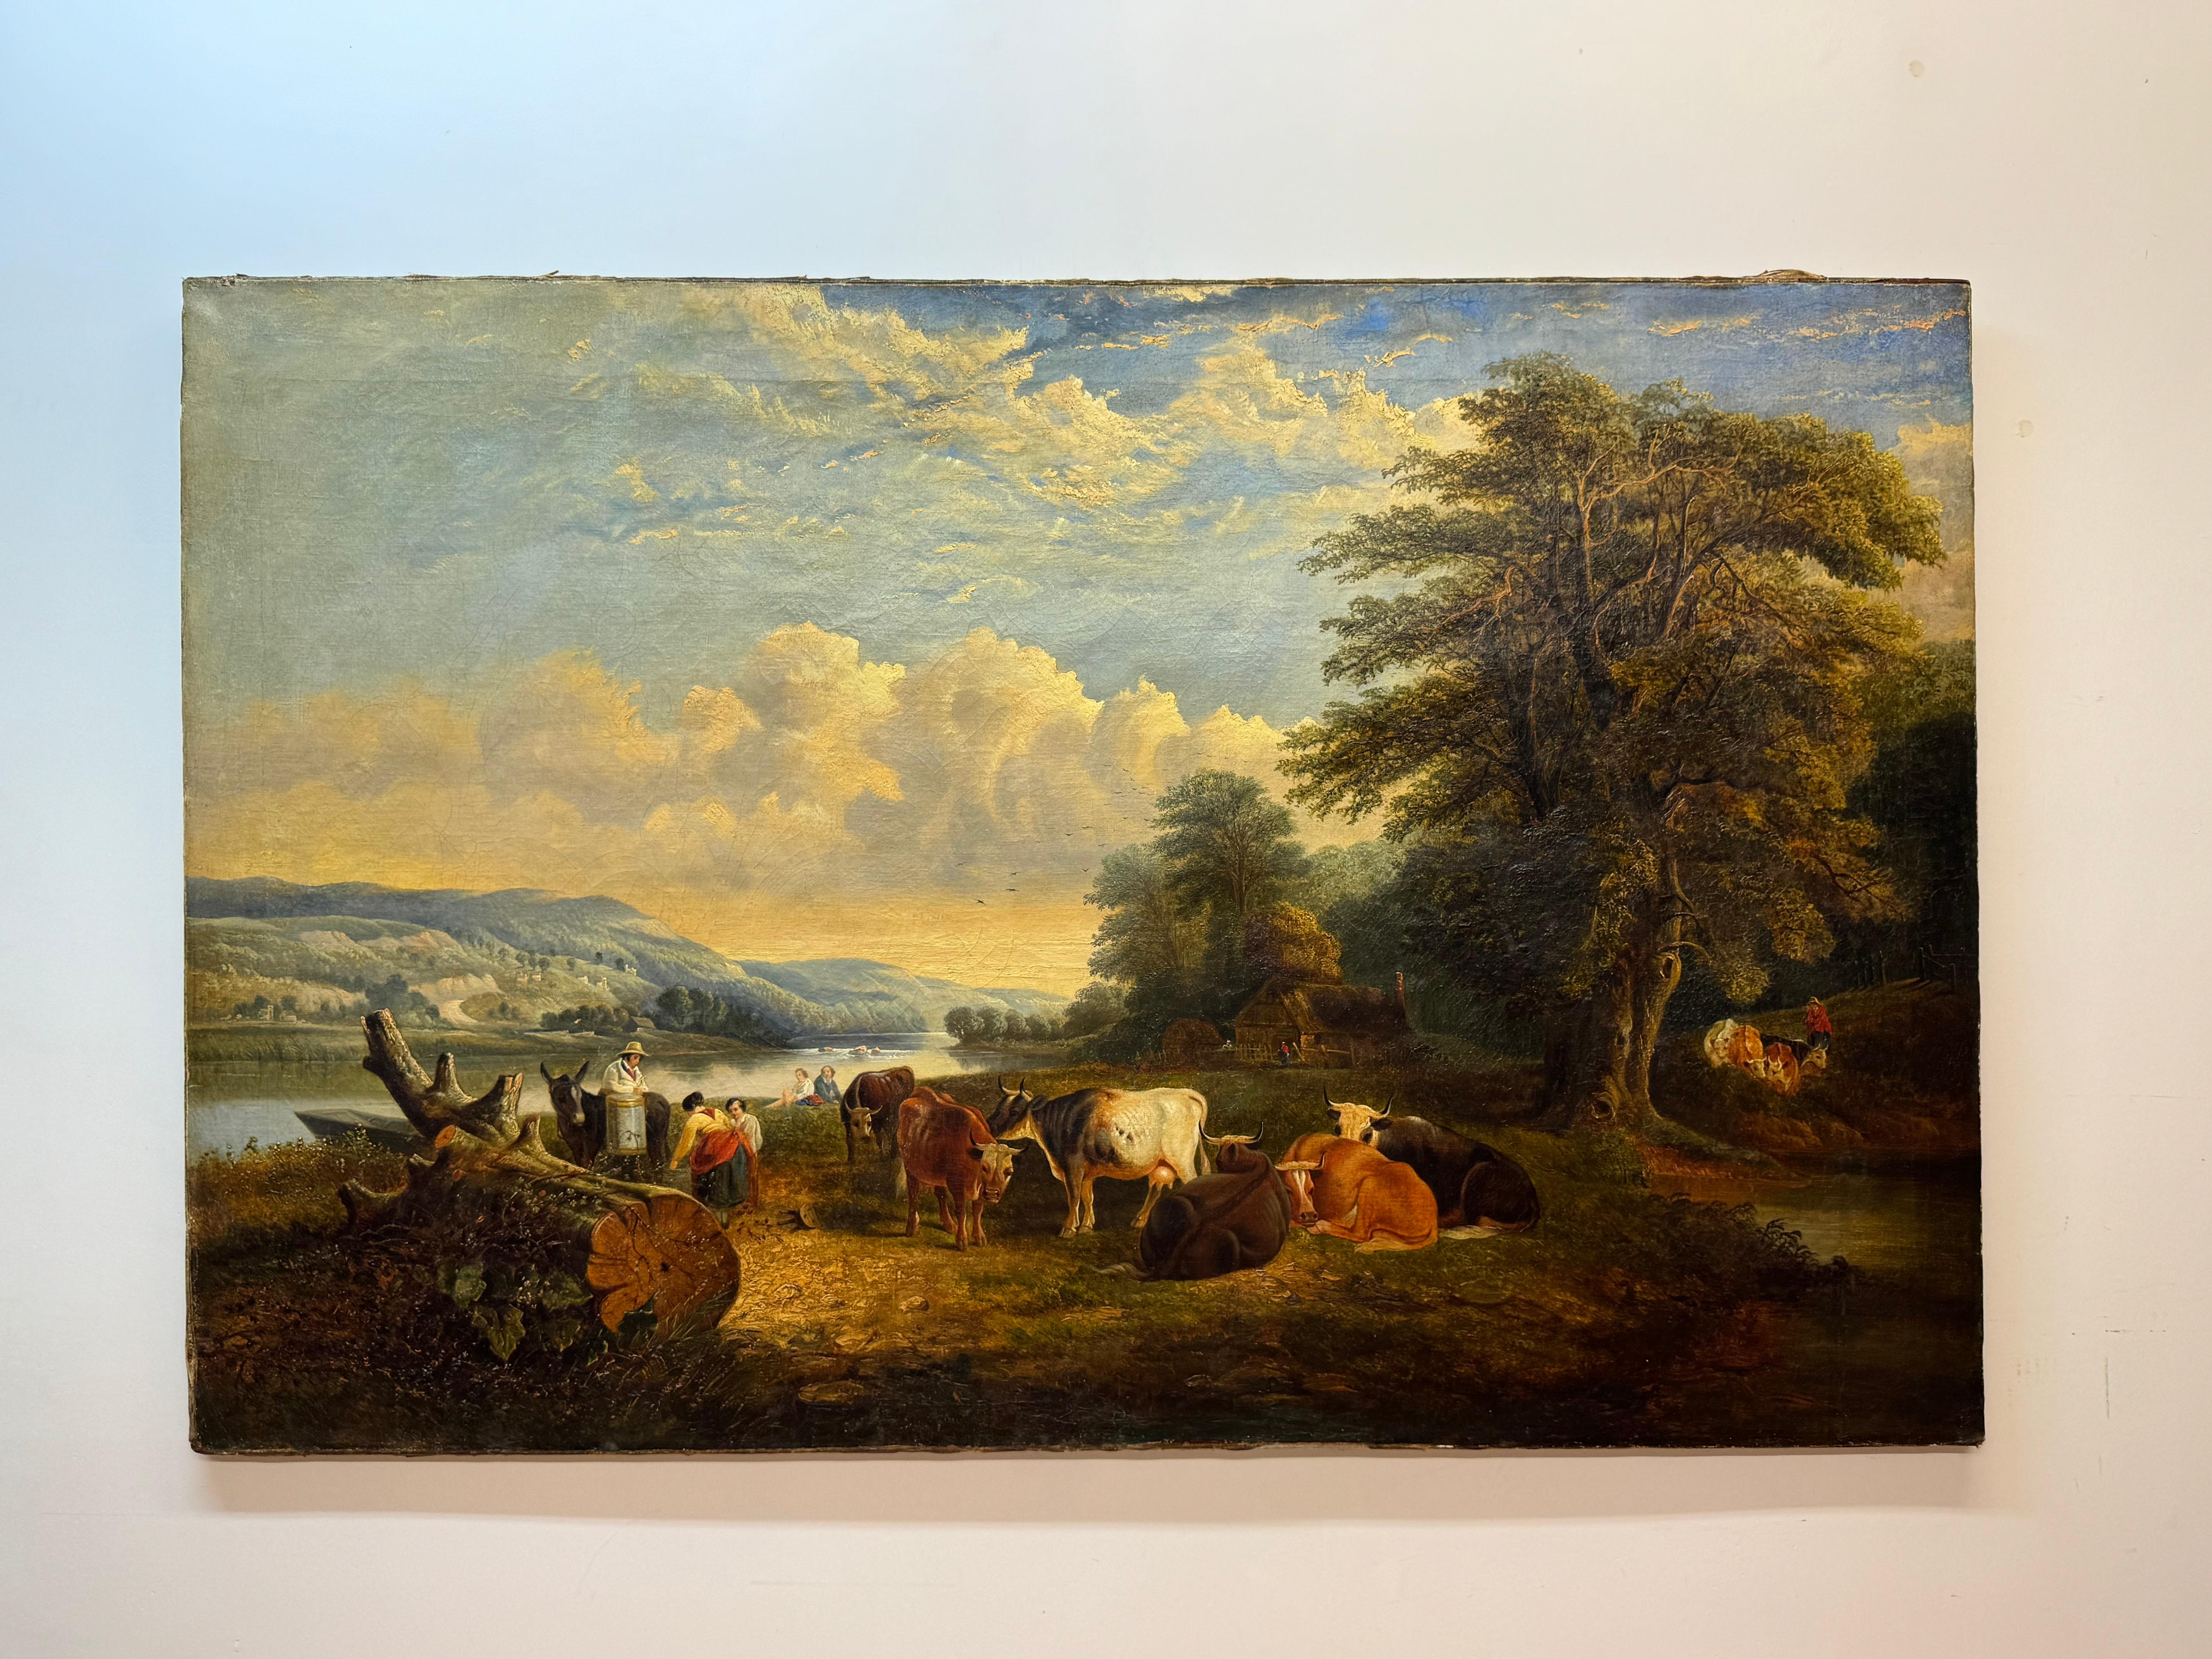 Unknown Landscape Painting - 19th century landscape with cattle and figures by a river